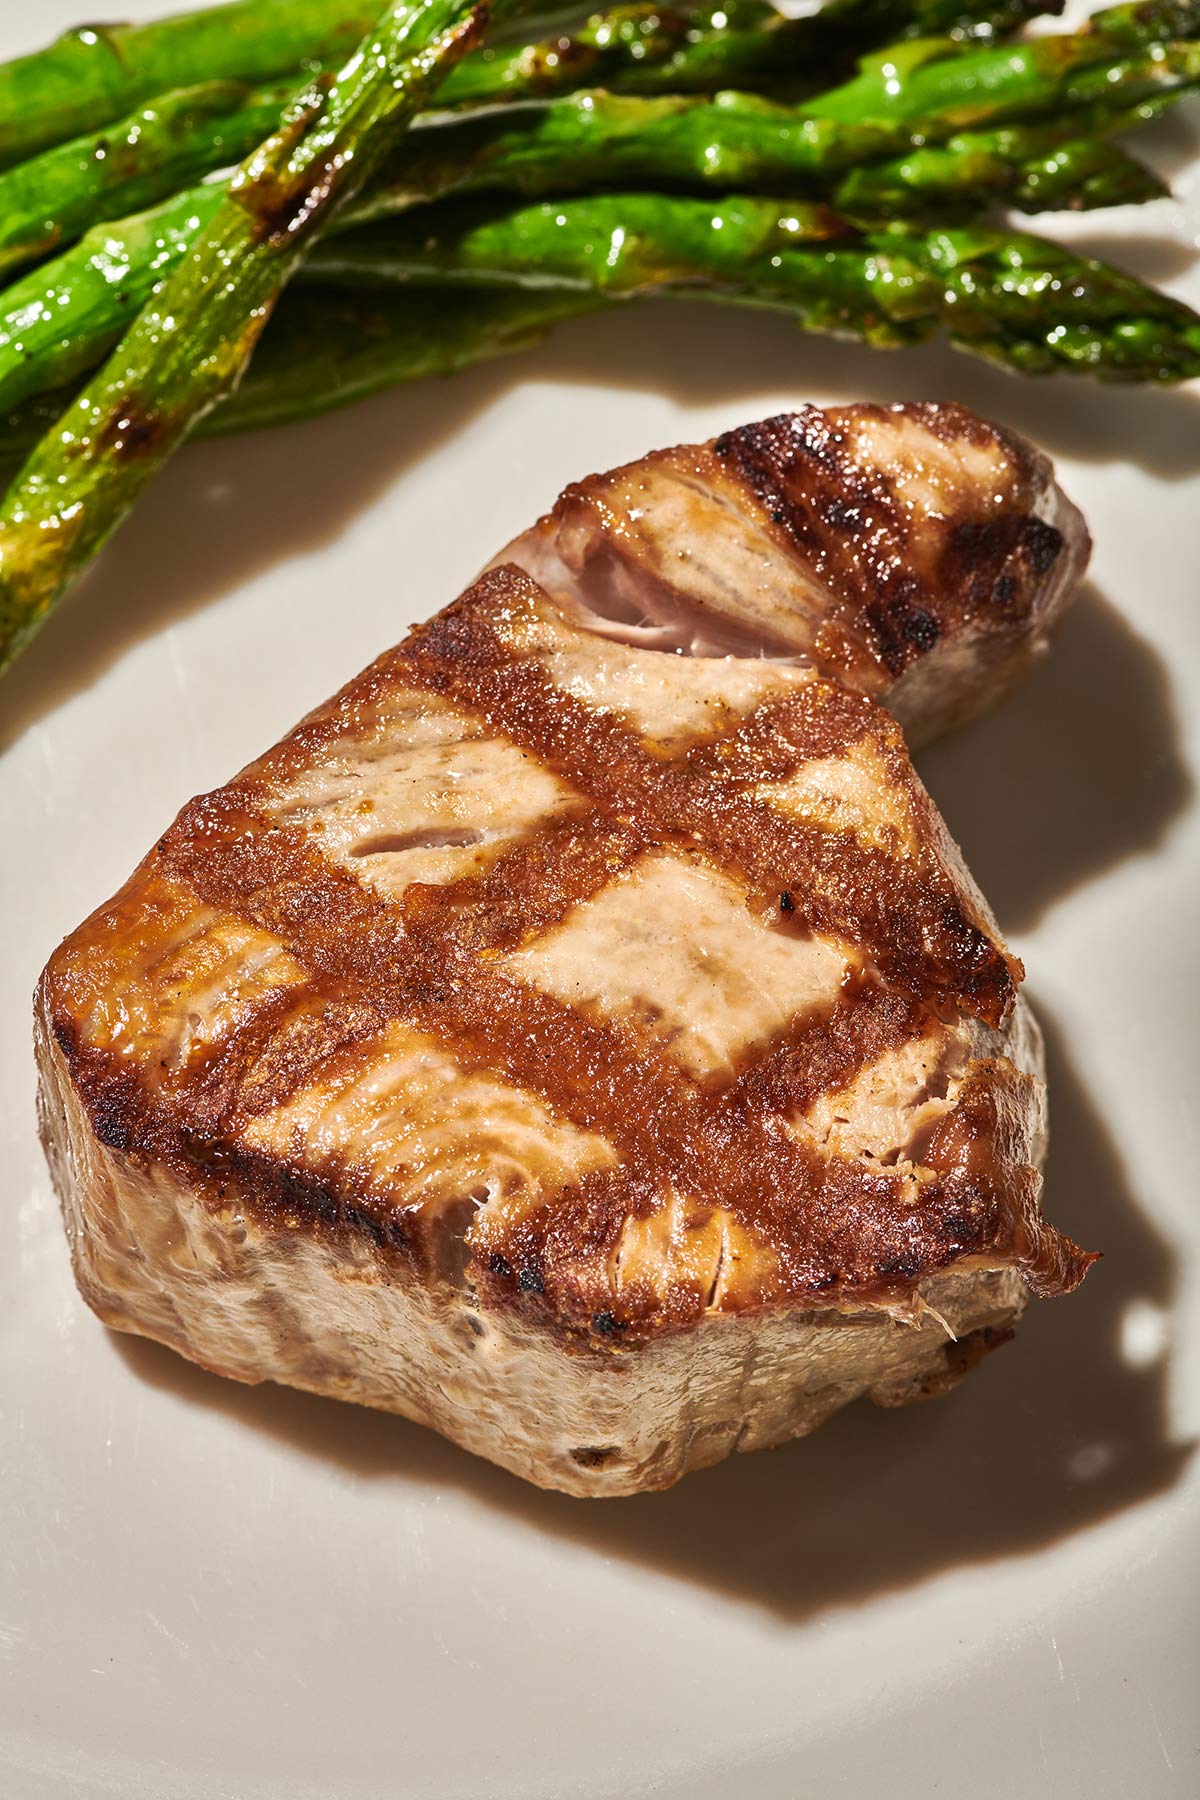 Grilled tuna steak on plate next to asparagus.